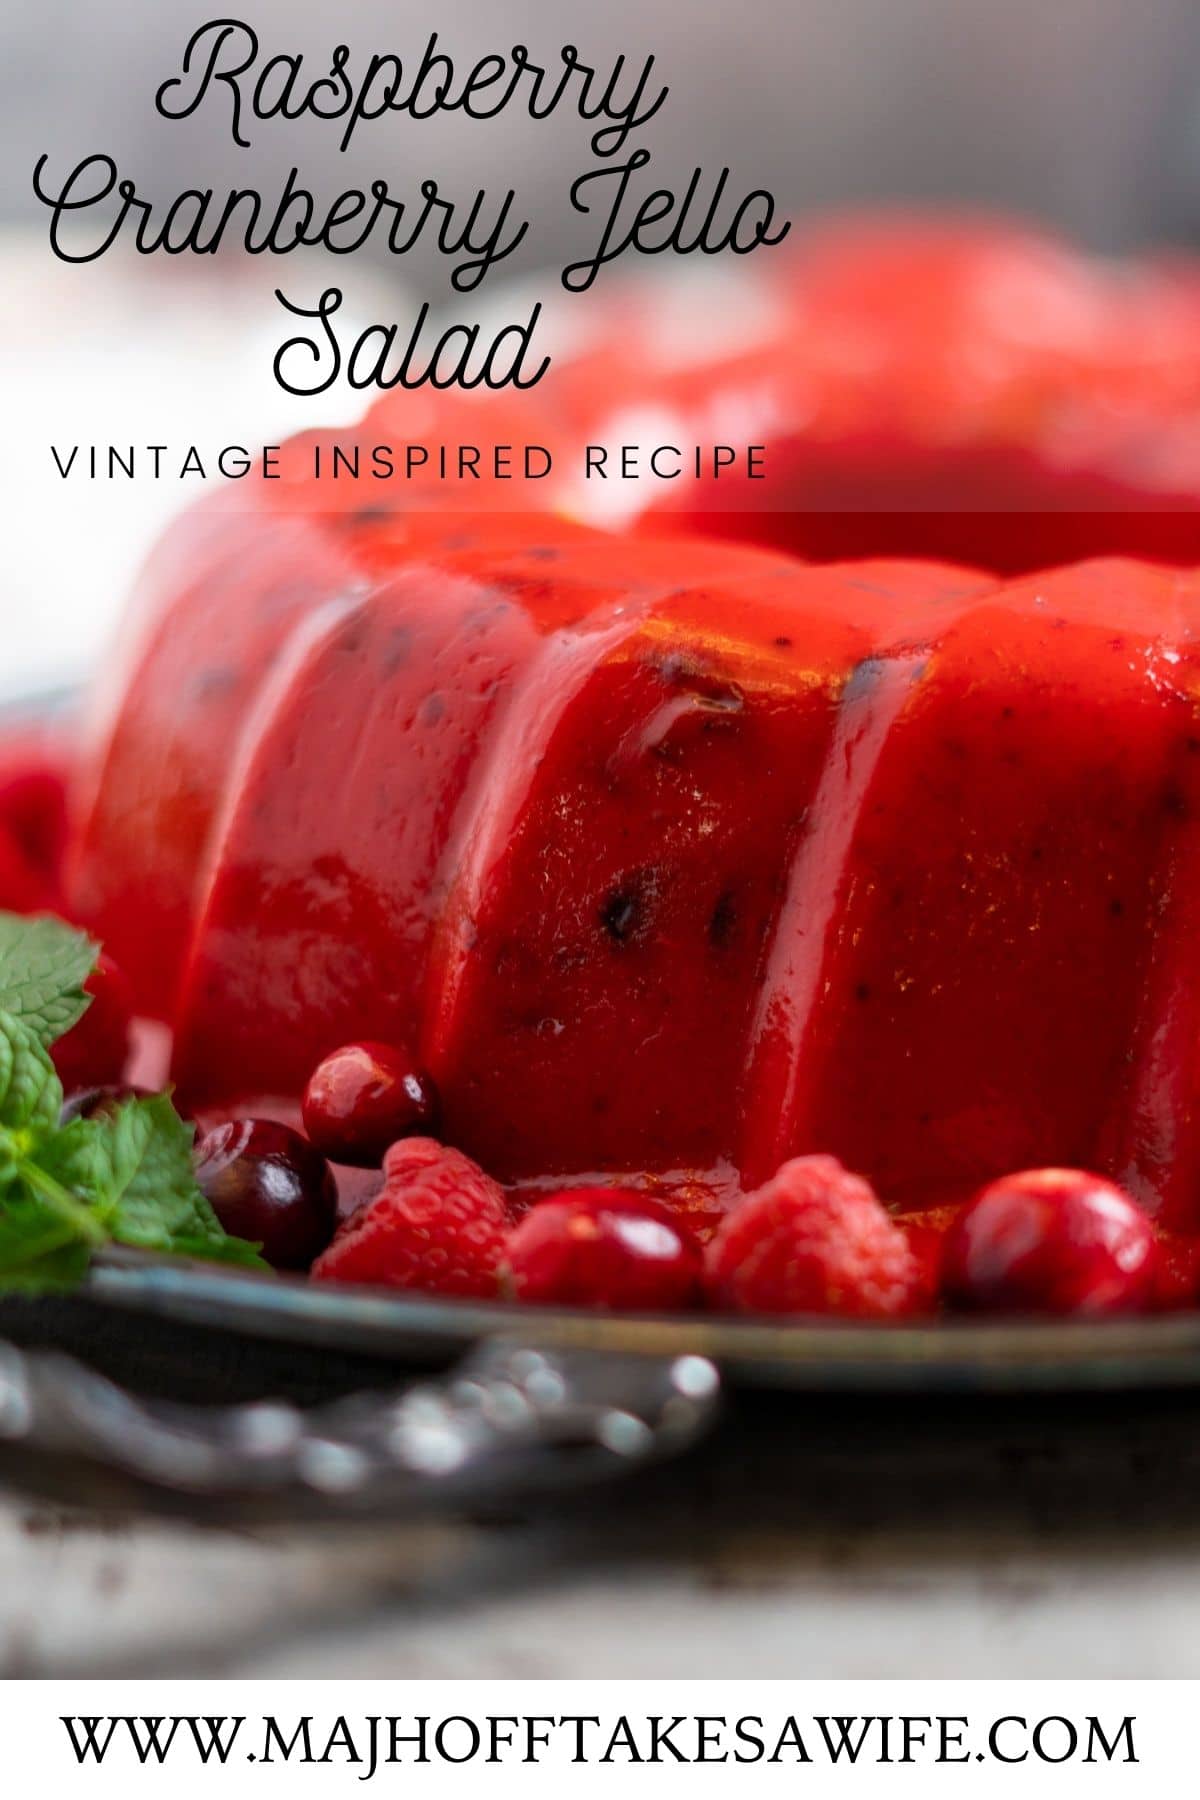 Classic raspberry cranberry jello salad is perfect to make for your holiday gatherings. It will take you 10-15 minutes to make, but the finished product is worth the short time investment. This vintage inspired recipe is made with just a few simple ingredients: cranberry jello, raspberry jello, whole berry cranberry sauce, vanilla ice cream, pink lemonade concentrate and frozen raspberries. There is not a touch of pineapple or mayonnaise in sight! Sure to become a holiday favorite! via @mrsmajorhoff